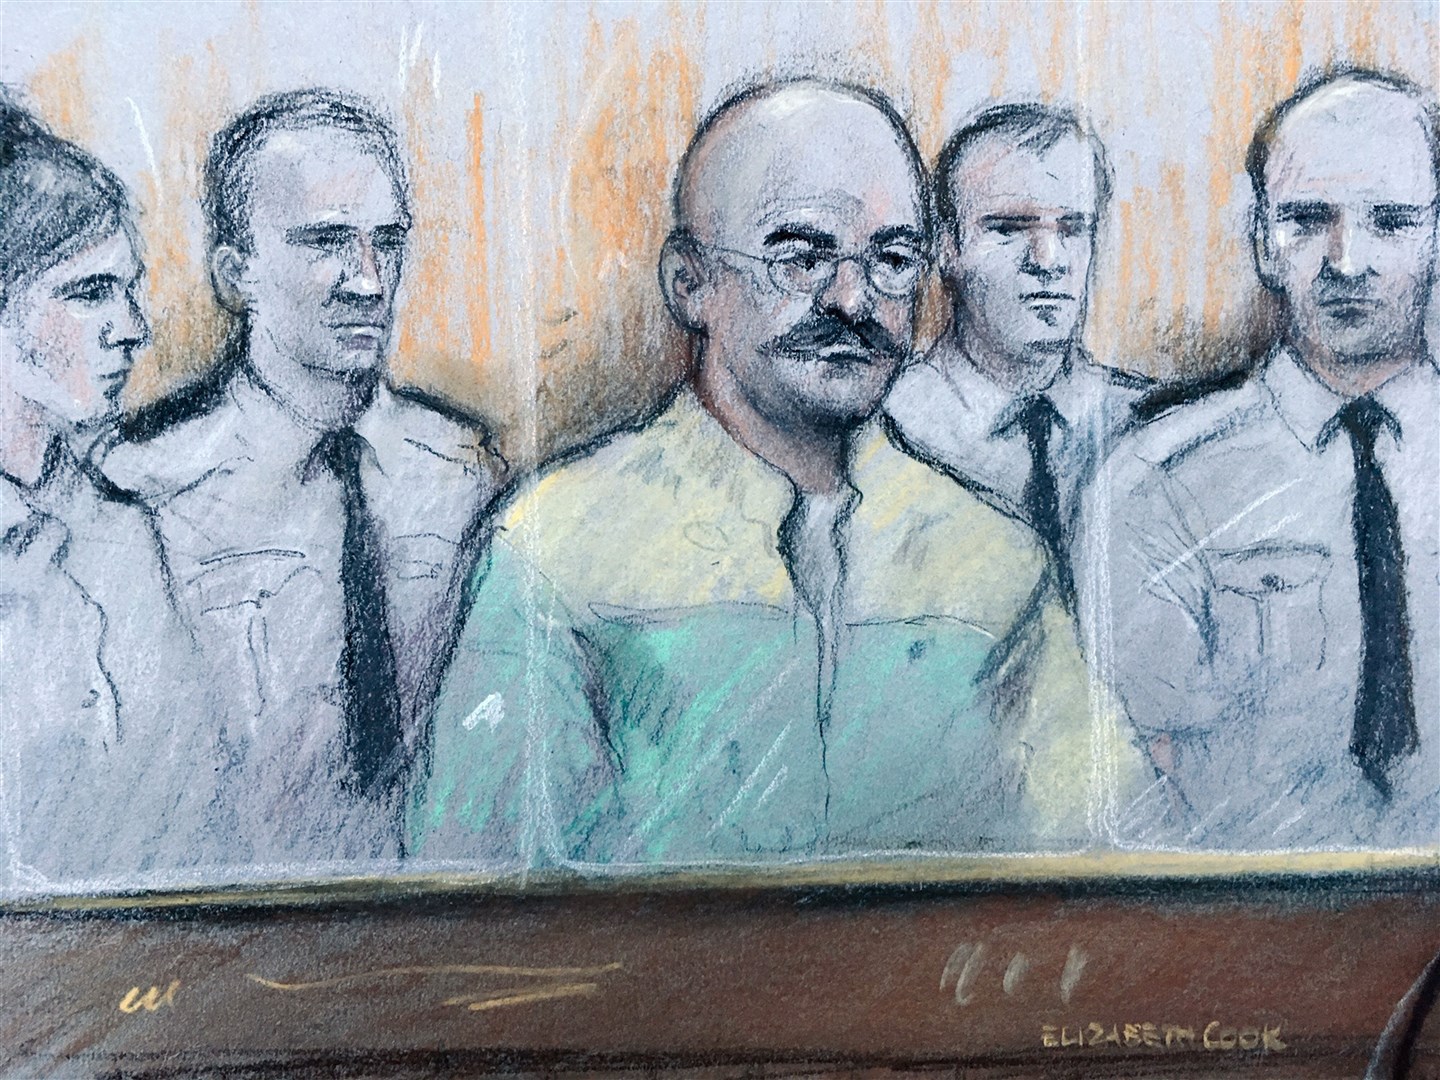 Charles Bronson in court (Elizabeth Cook/PA)